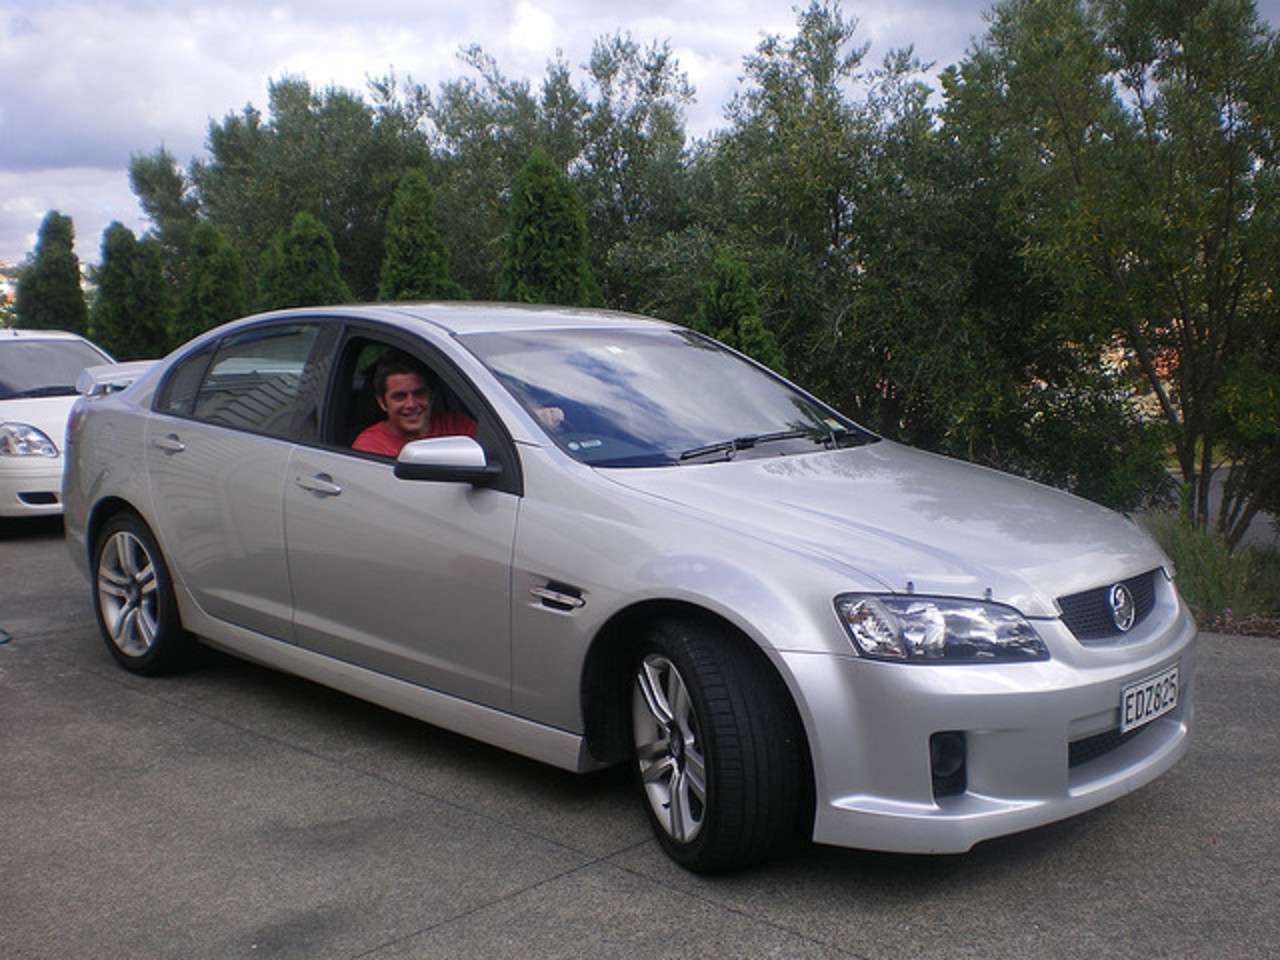 Holden Commodore SV6 | Flickr - Photo Sharing!